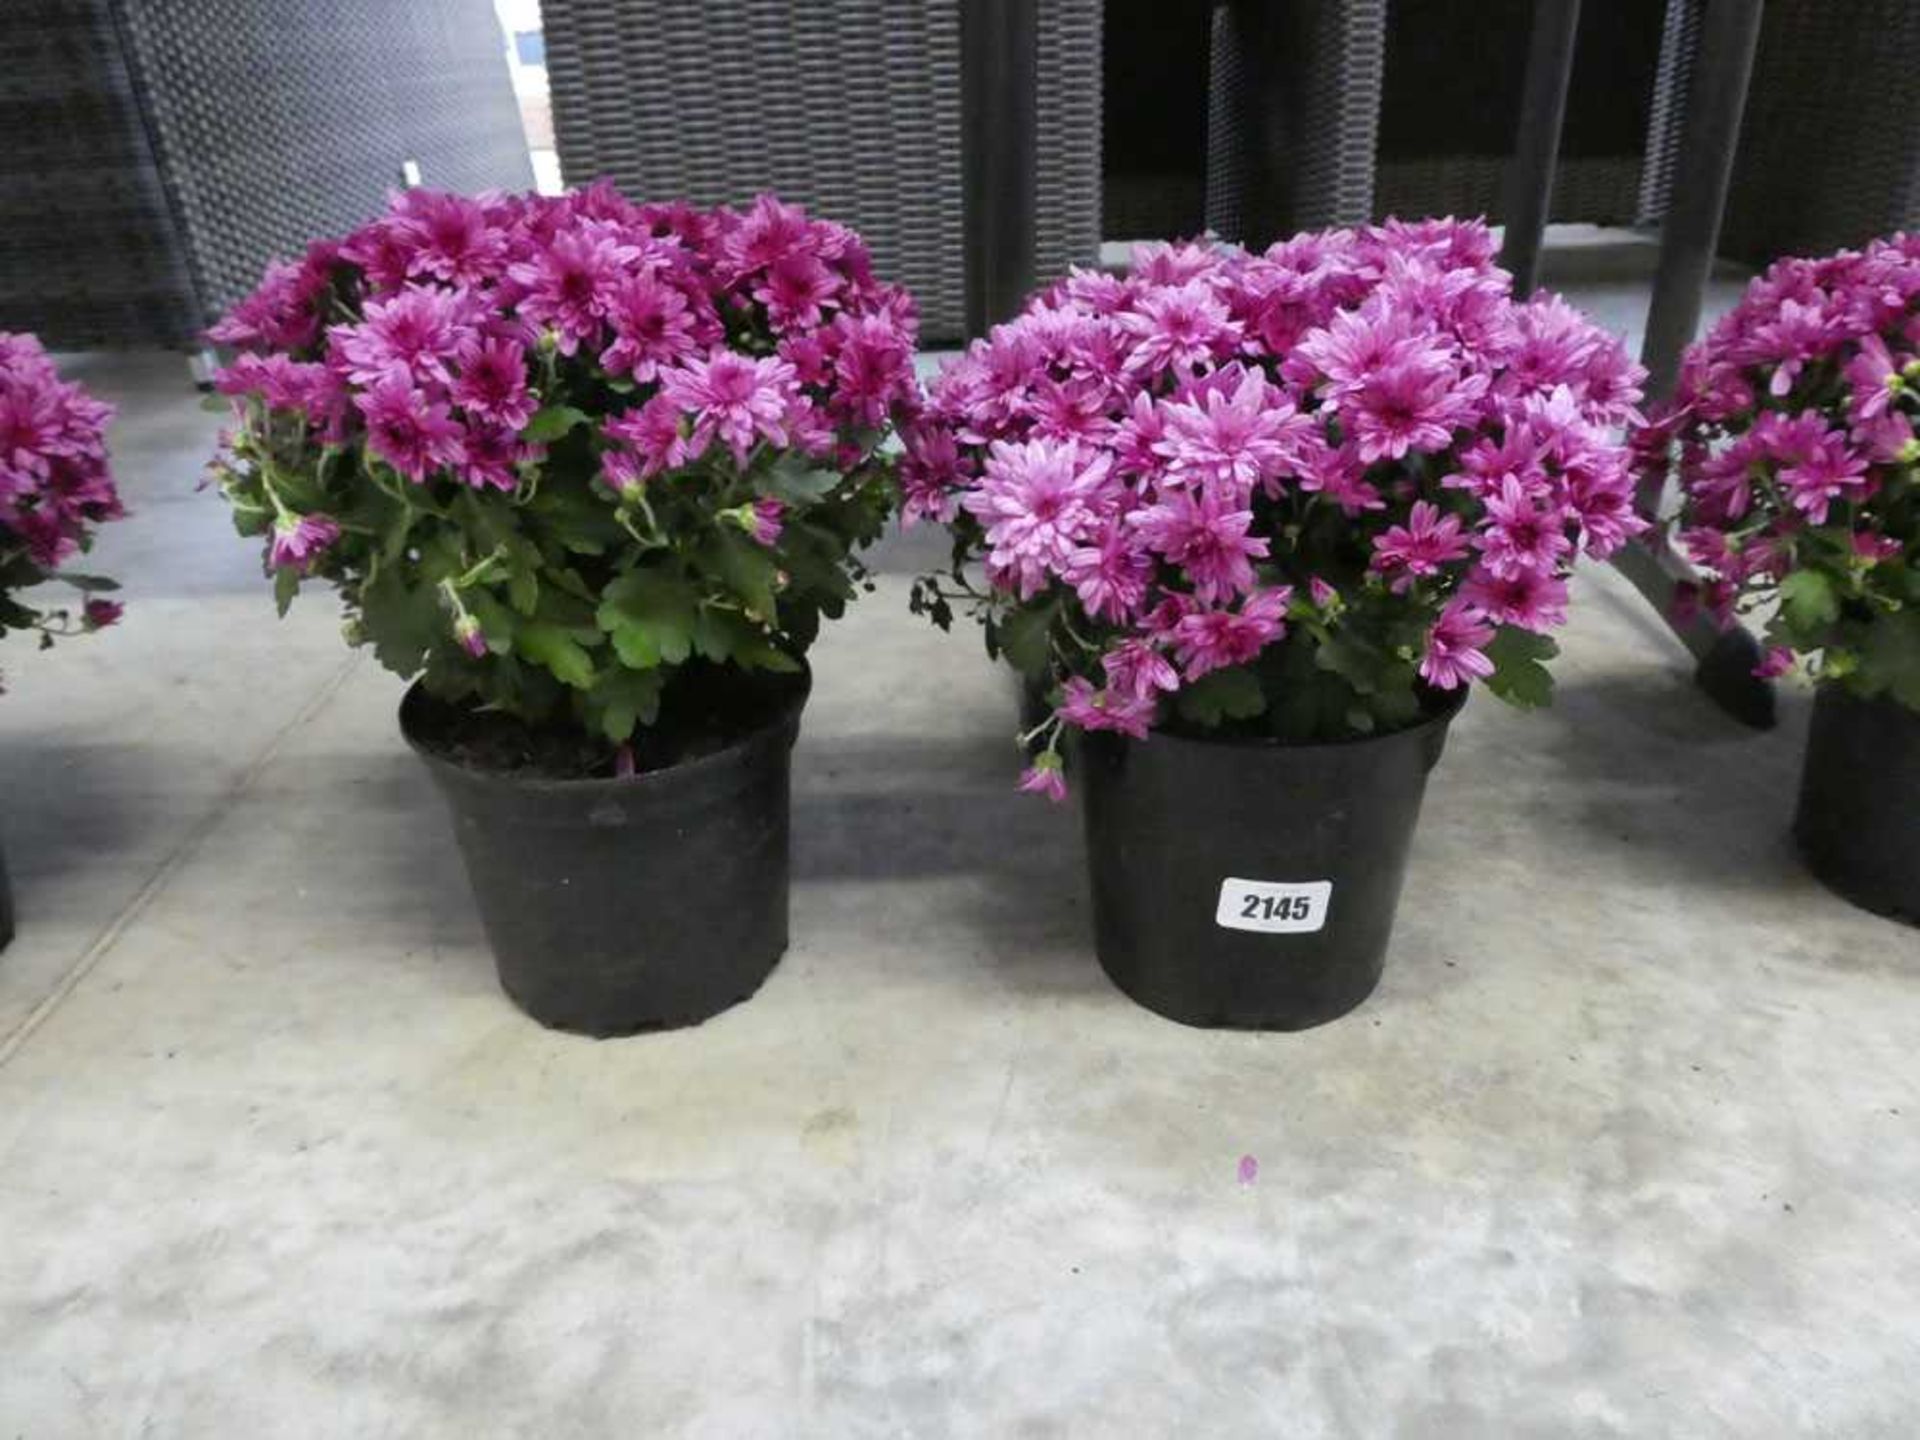 Pair of potted chrysanthemums